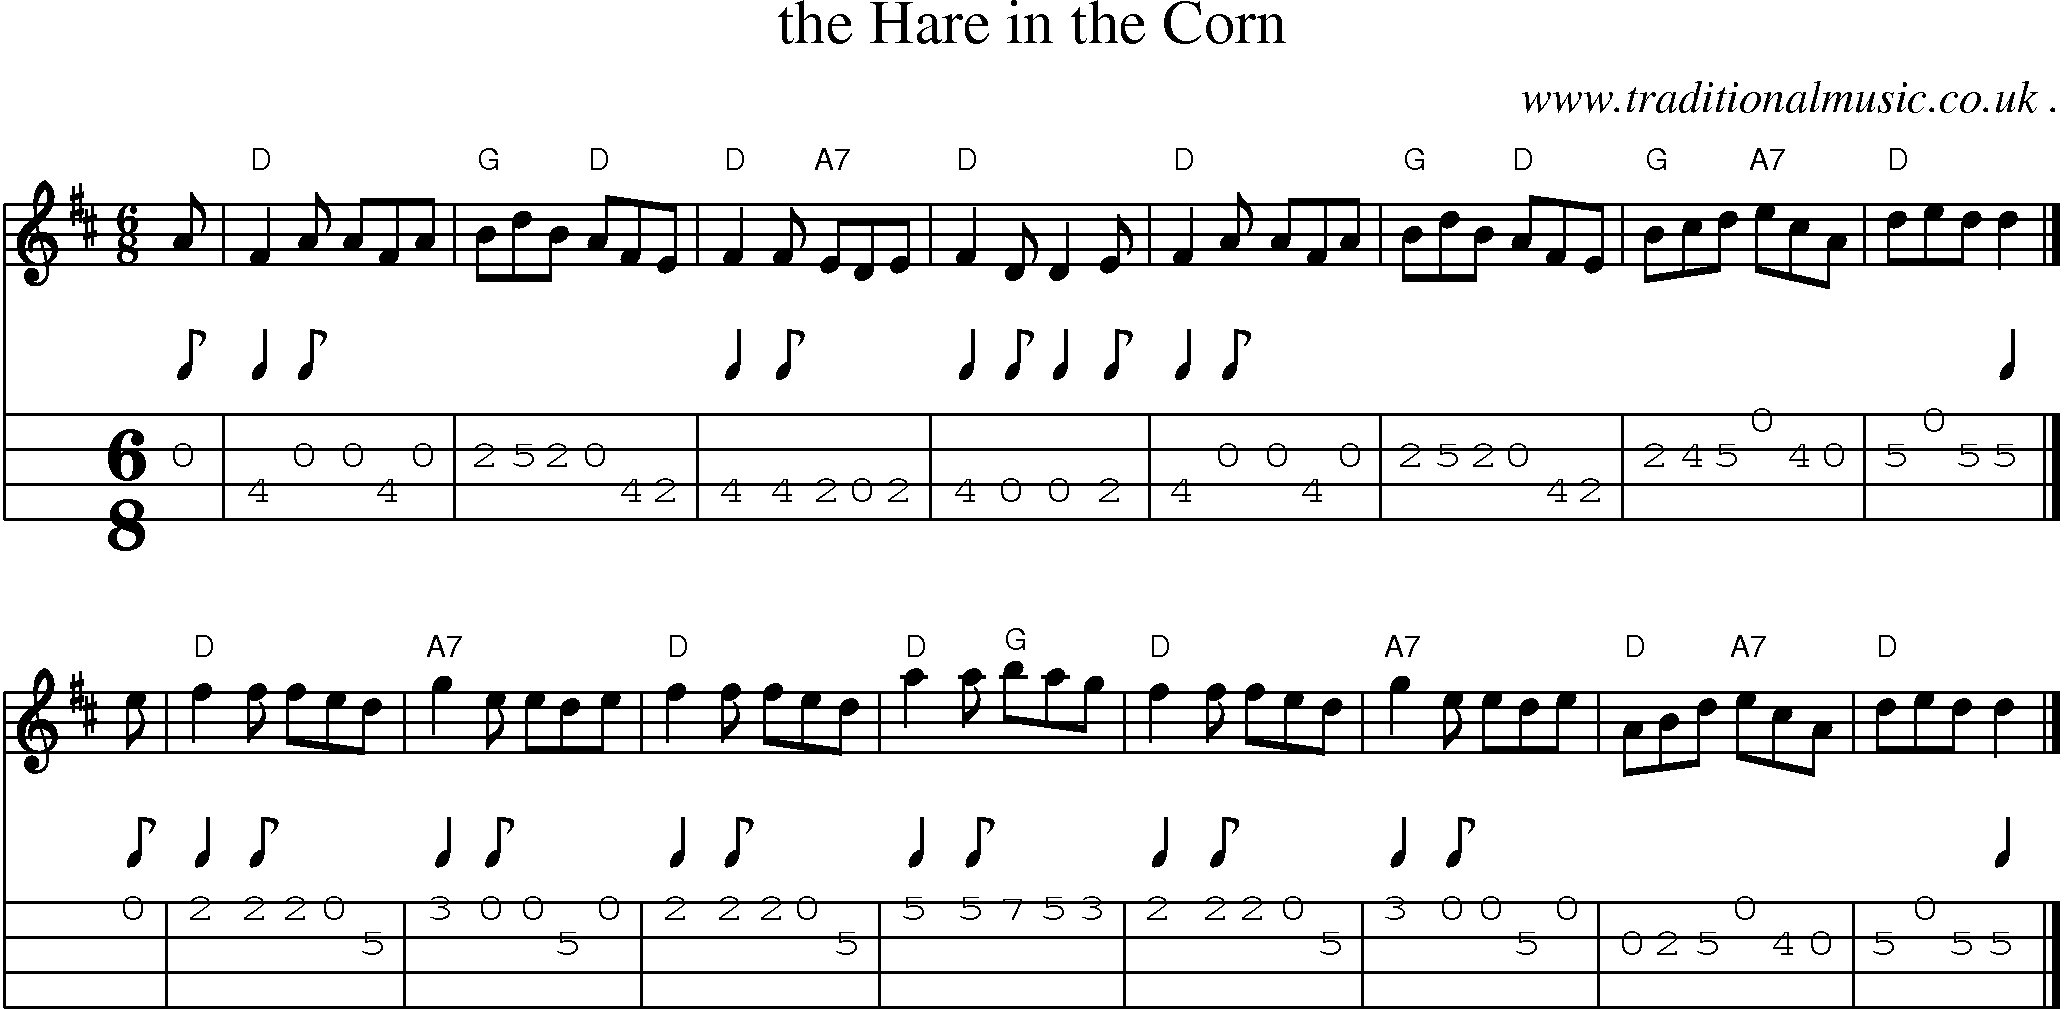 Sheet-music  score, Chords and Mandolin Tabs for The Hare In The Corn